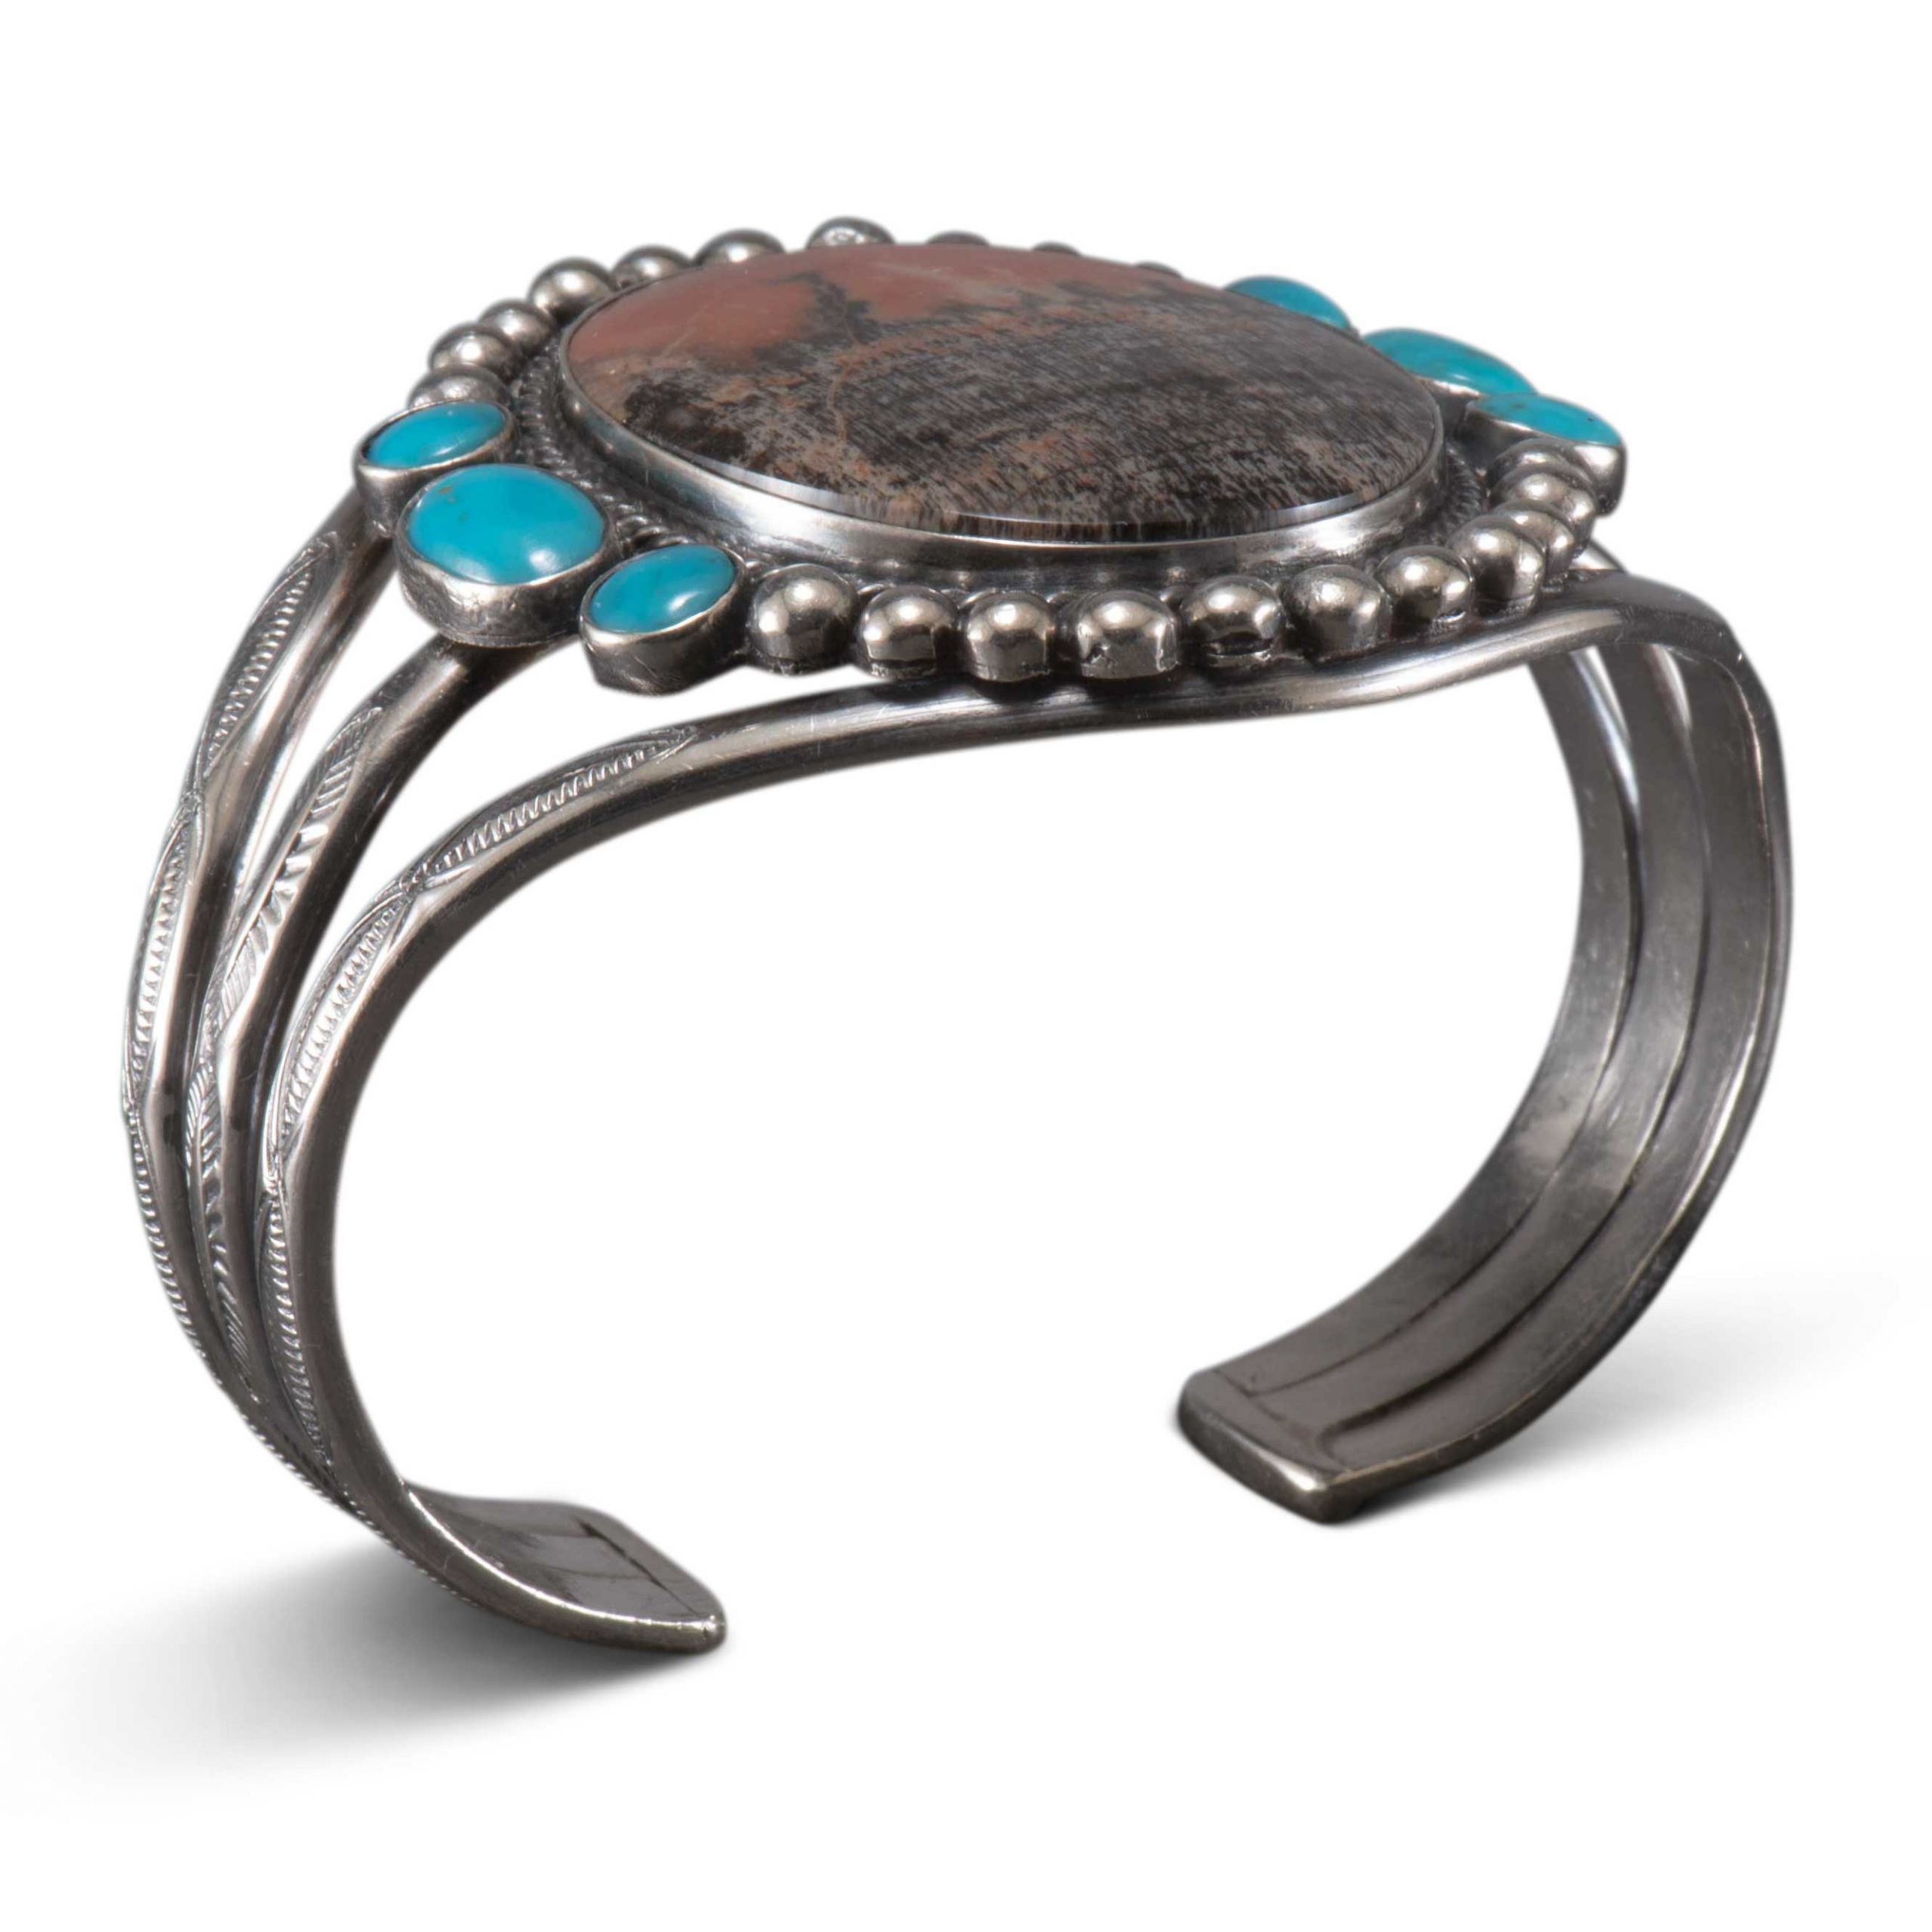 Vintage Navajo Petrified Wood and Turquoise Cuff